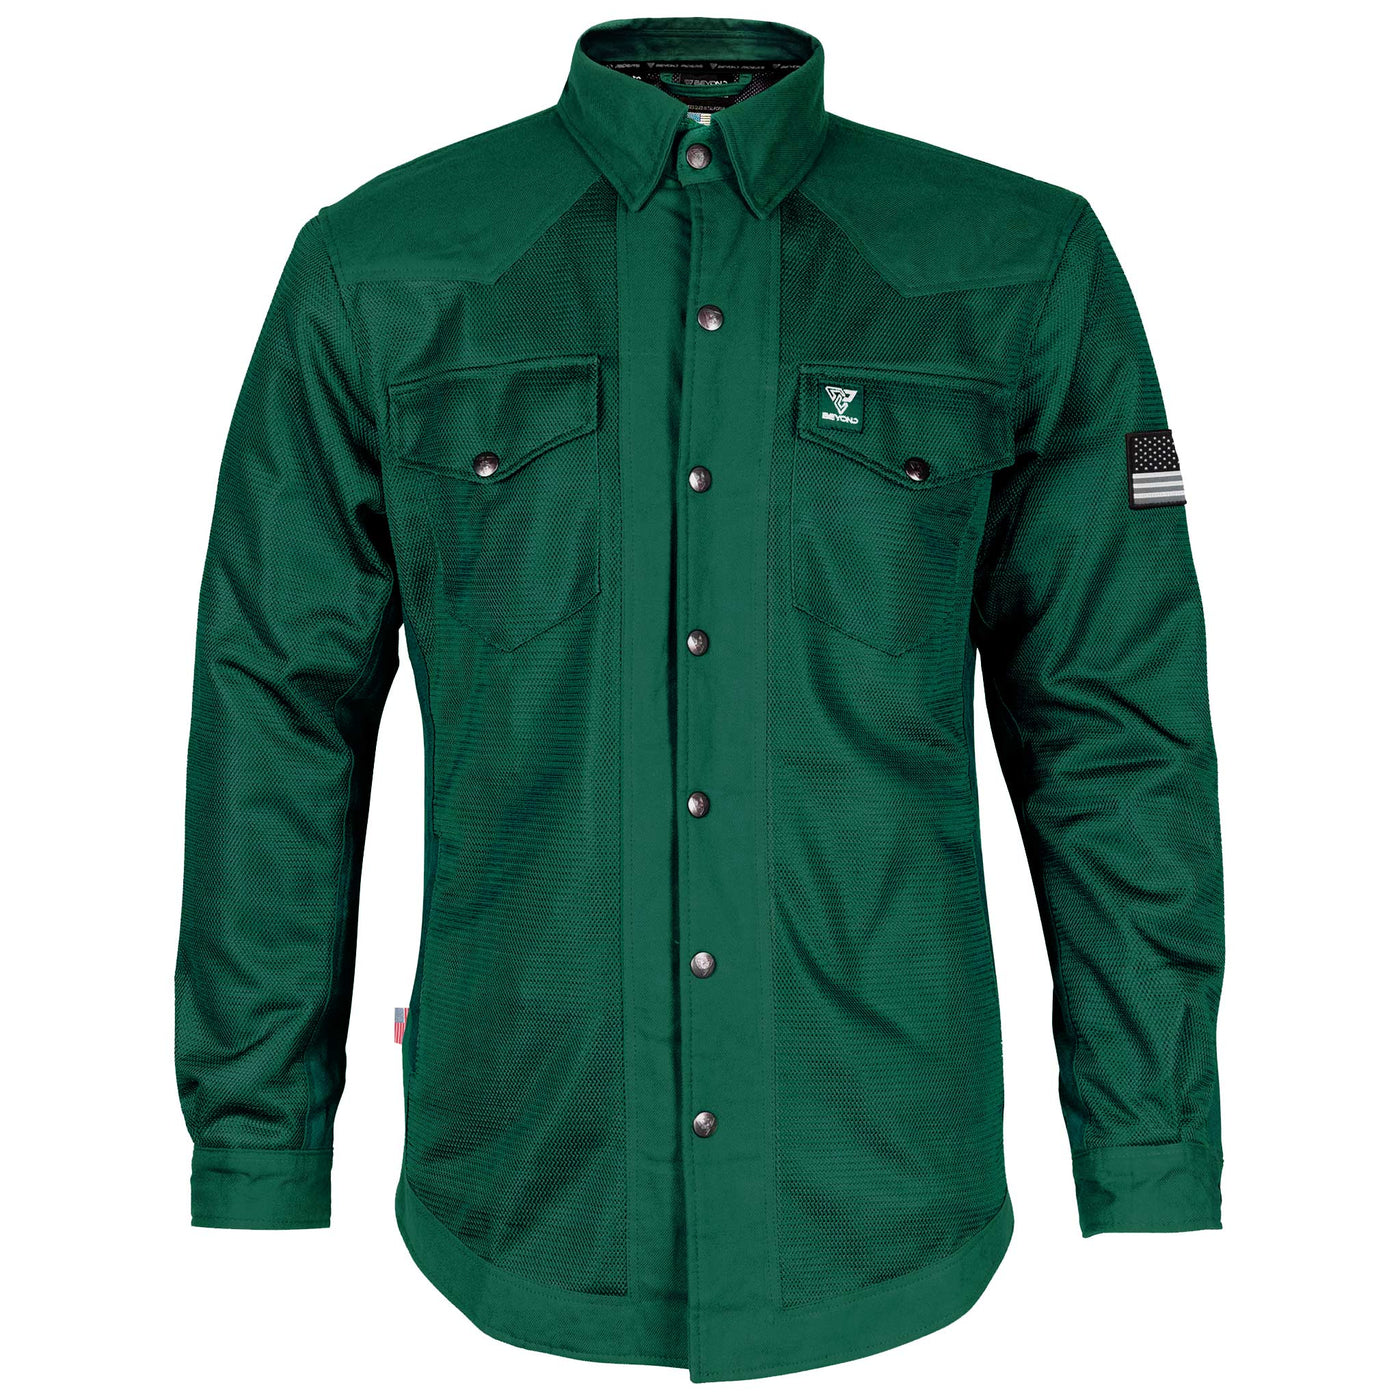 Protective Summer Mesh Shirt with Pads - Dark Green Solid